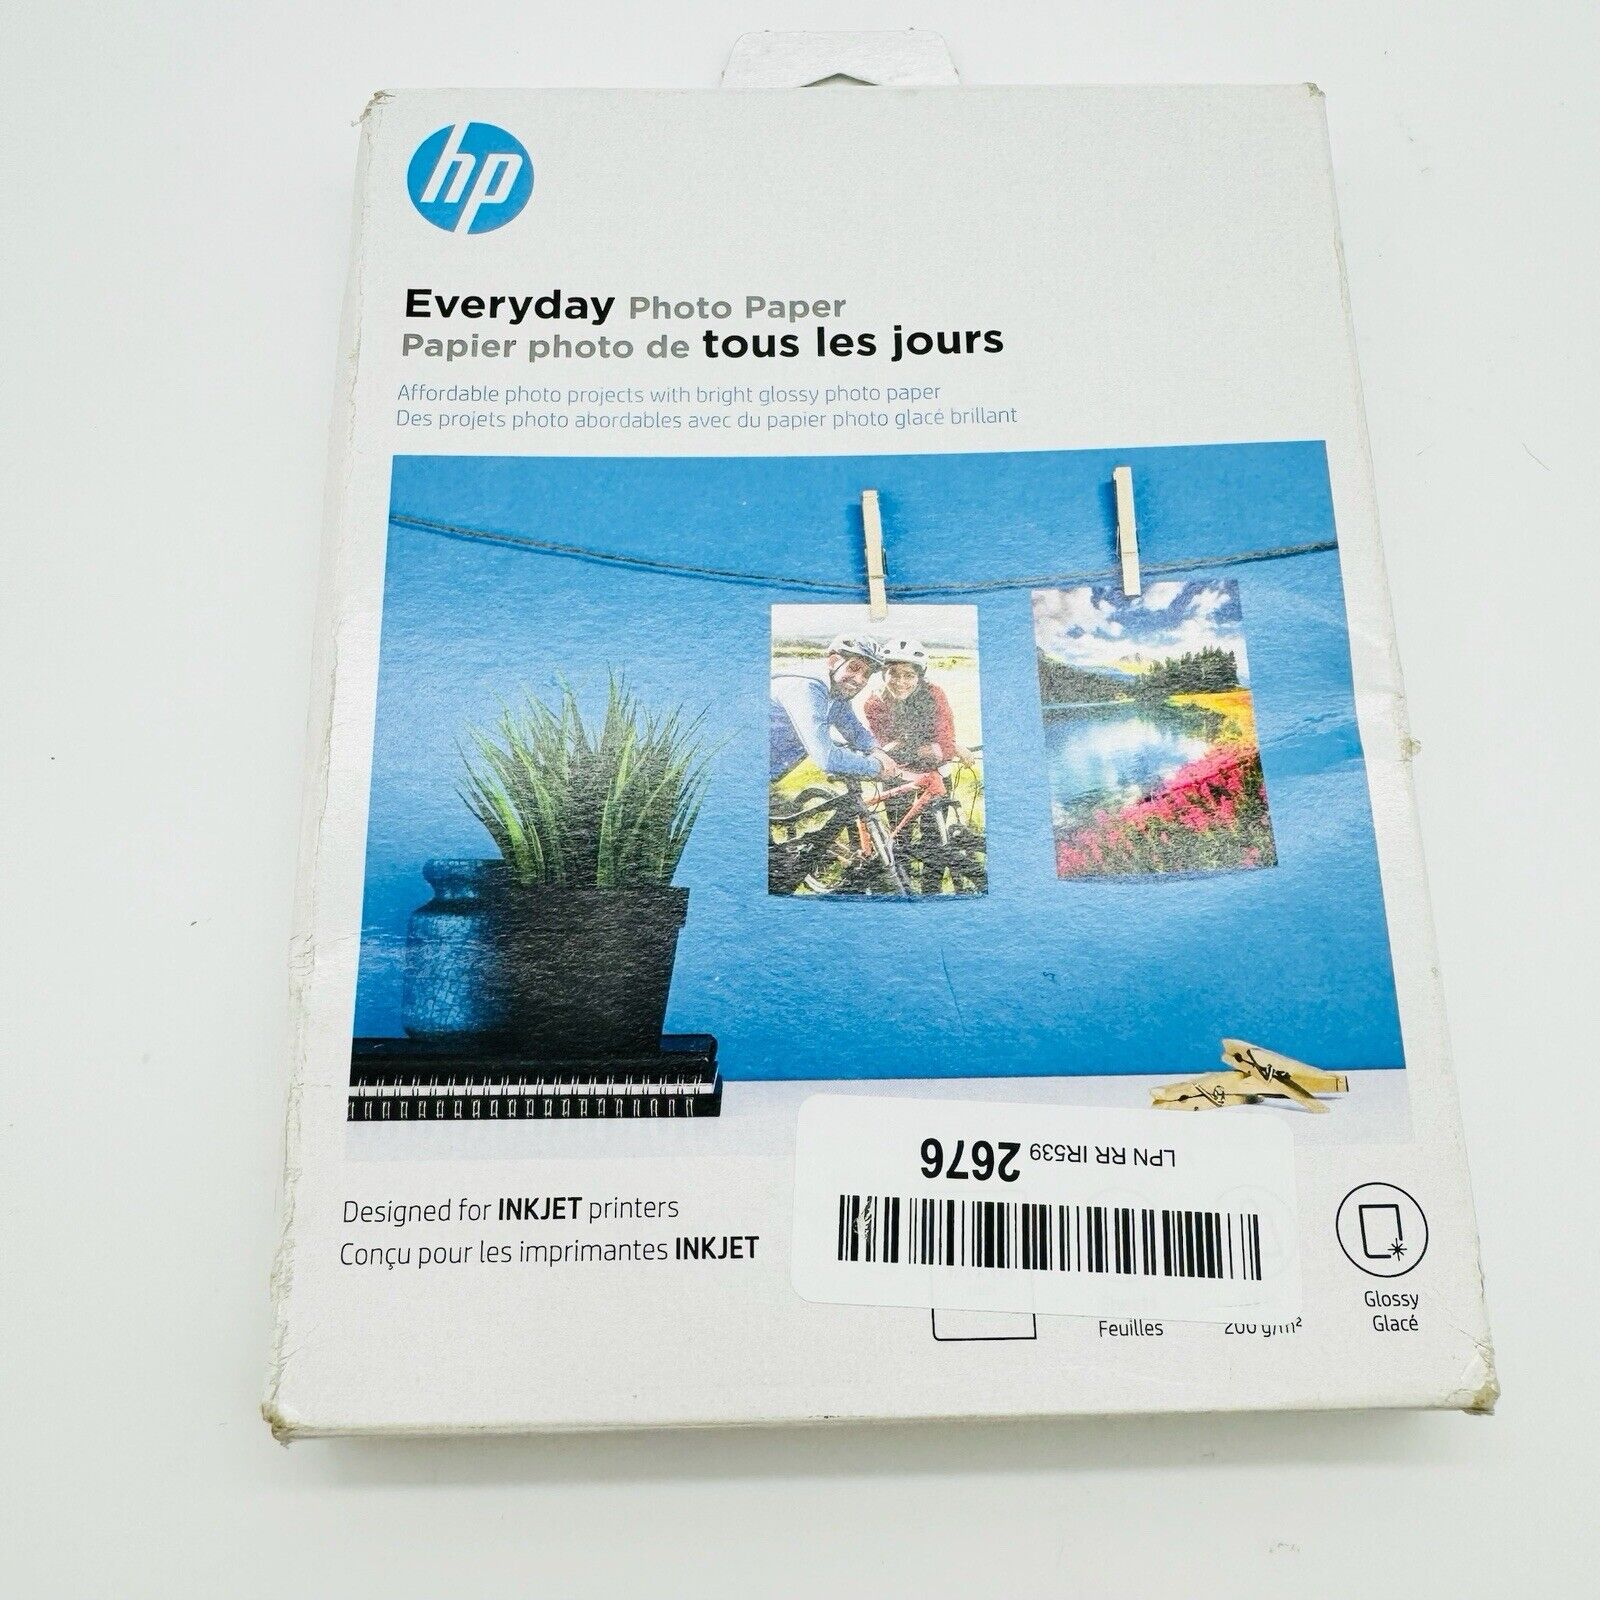 HP Everyday Photo Paper - Glossy|53 lb|5 x 7 in. (127 x 178 mm) | 60 sheets